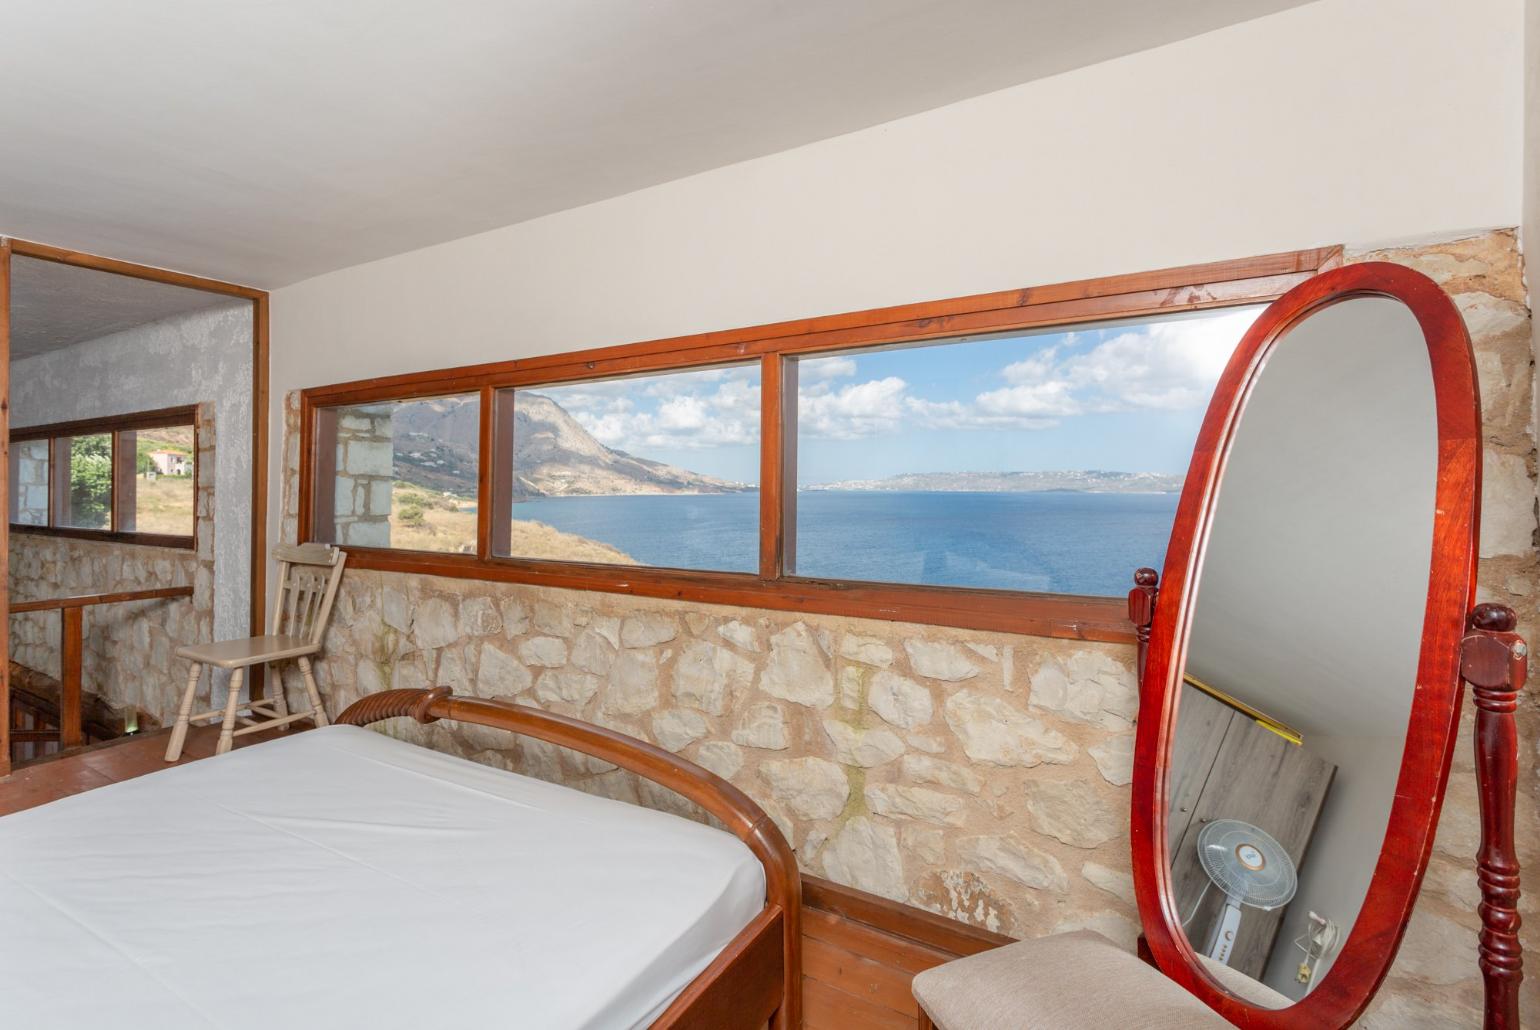 Double bedroom on mezzanine of self-contained apartment with panoramic sea views